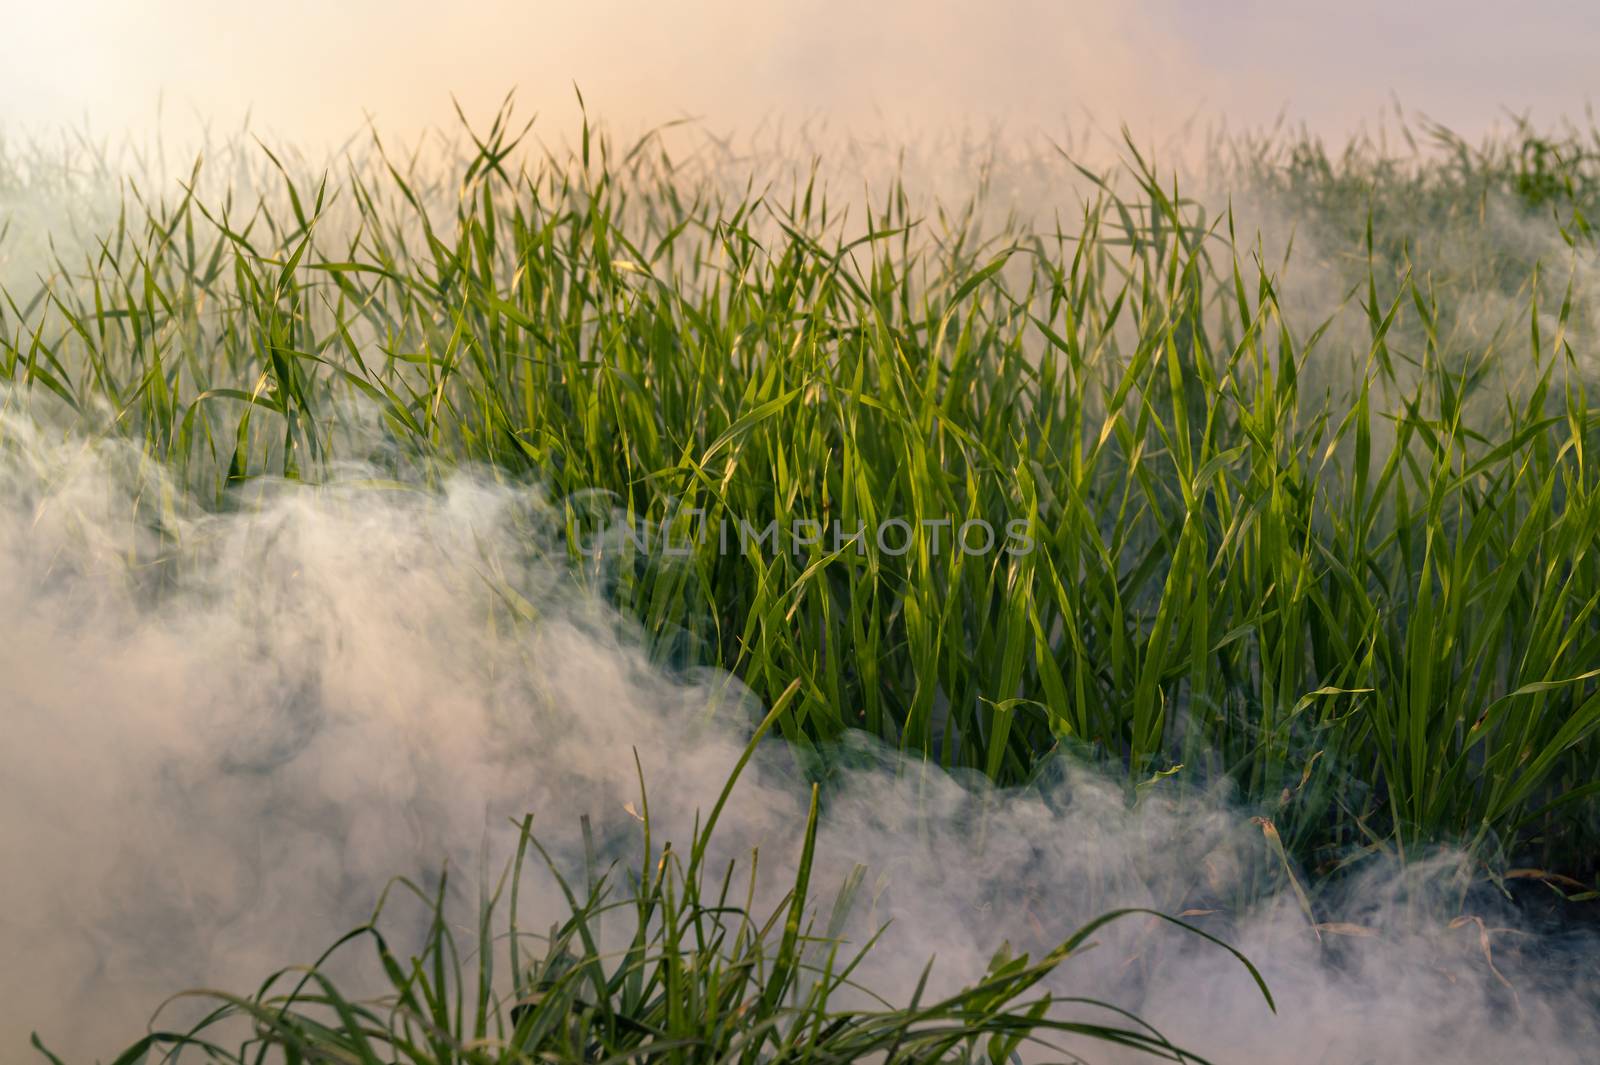 The silver smoke in grass from smoke bomb against evening sun. 